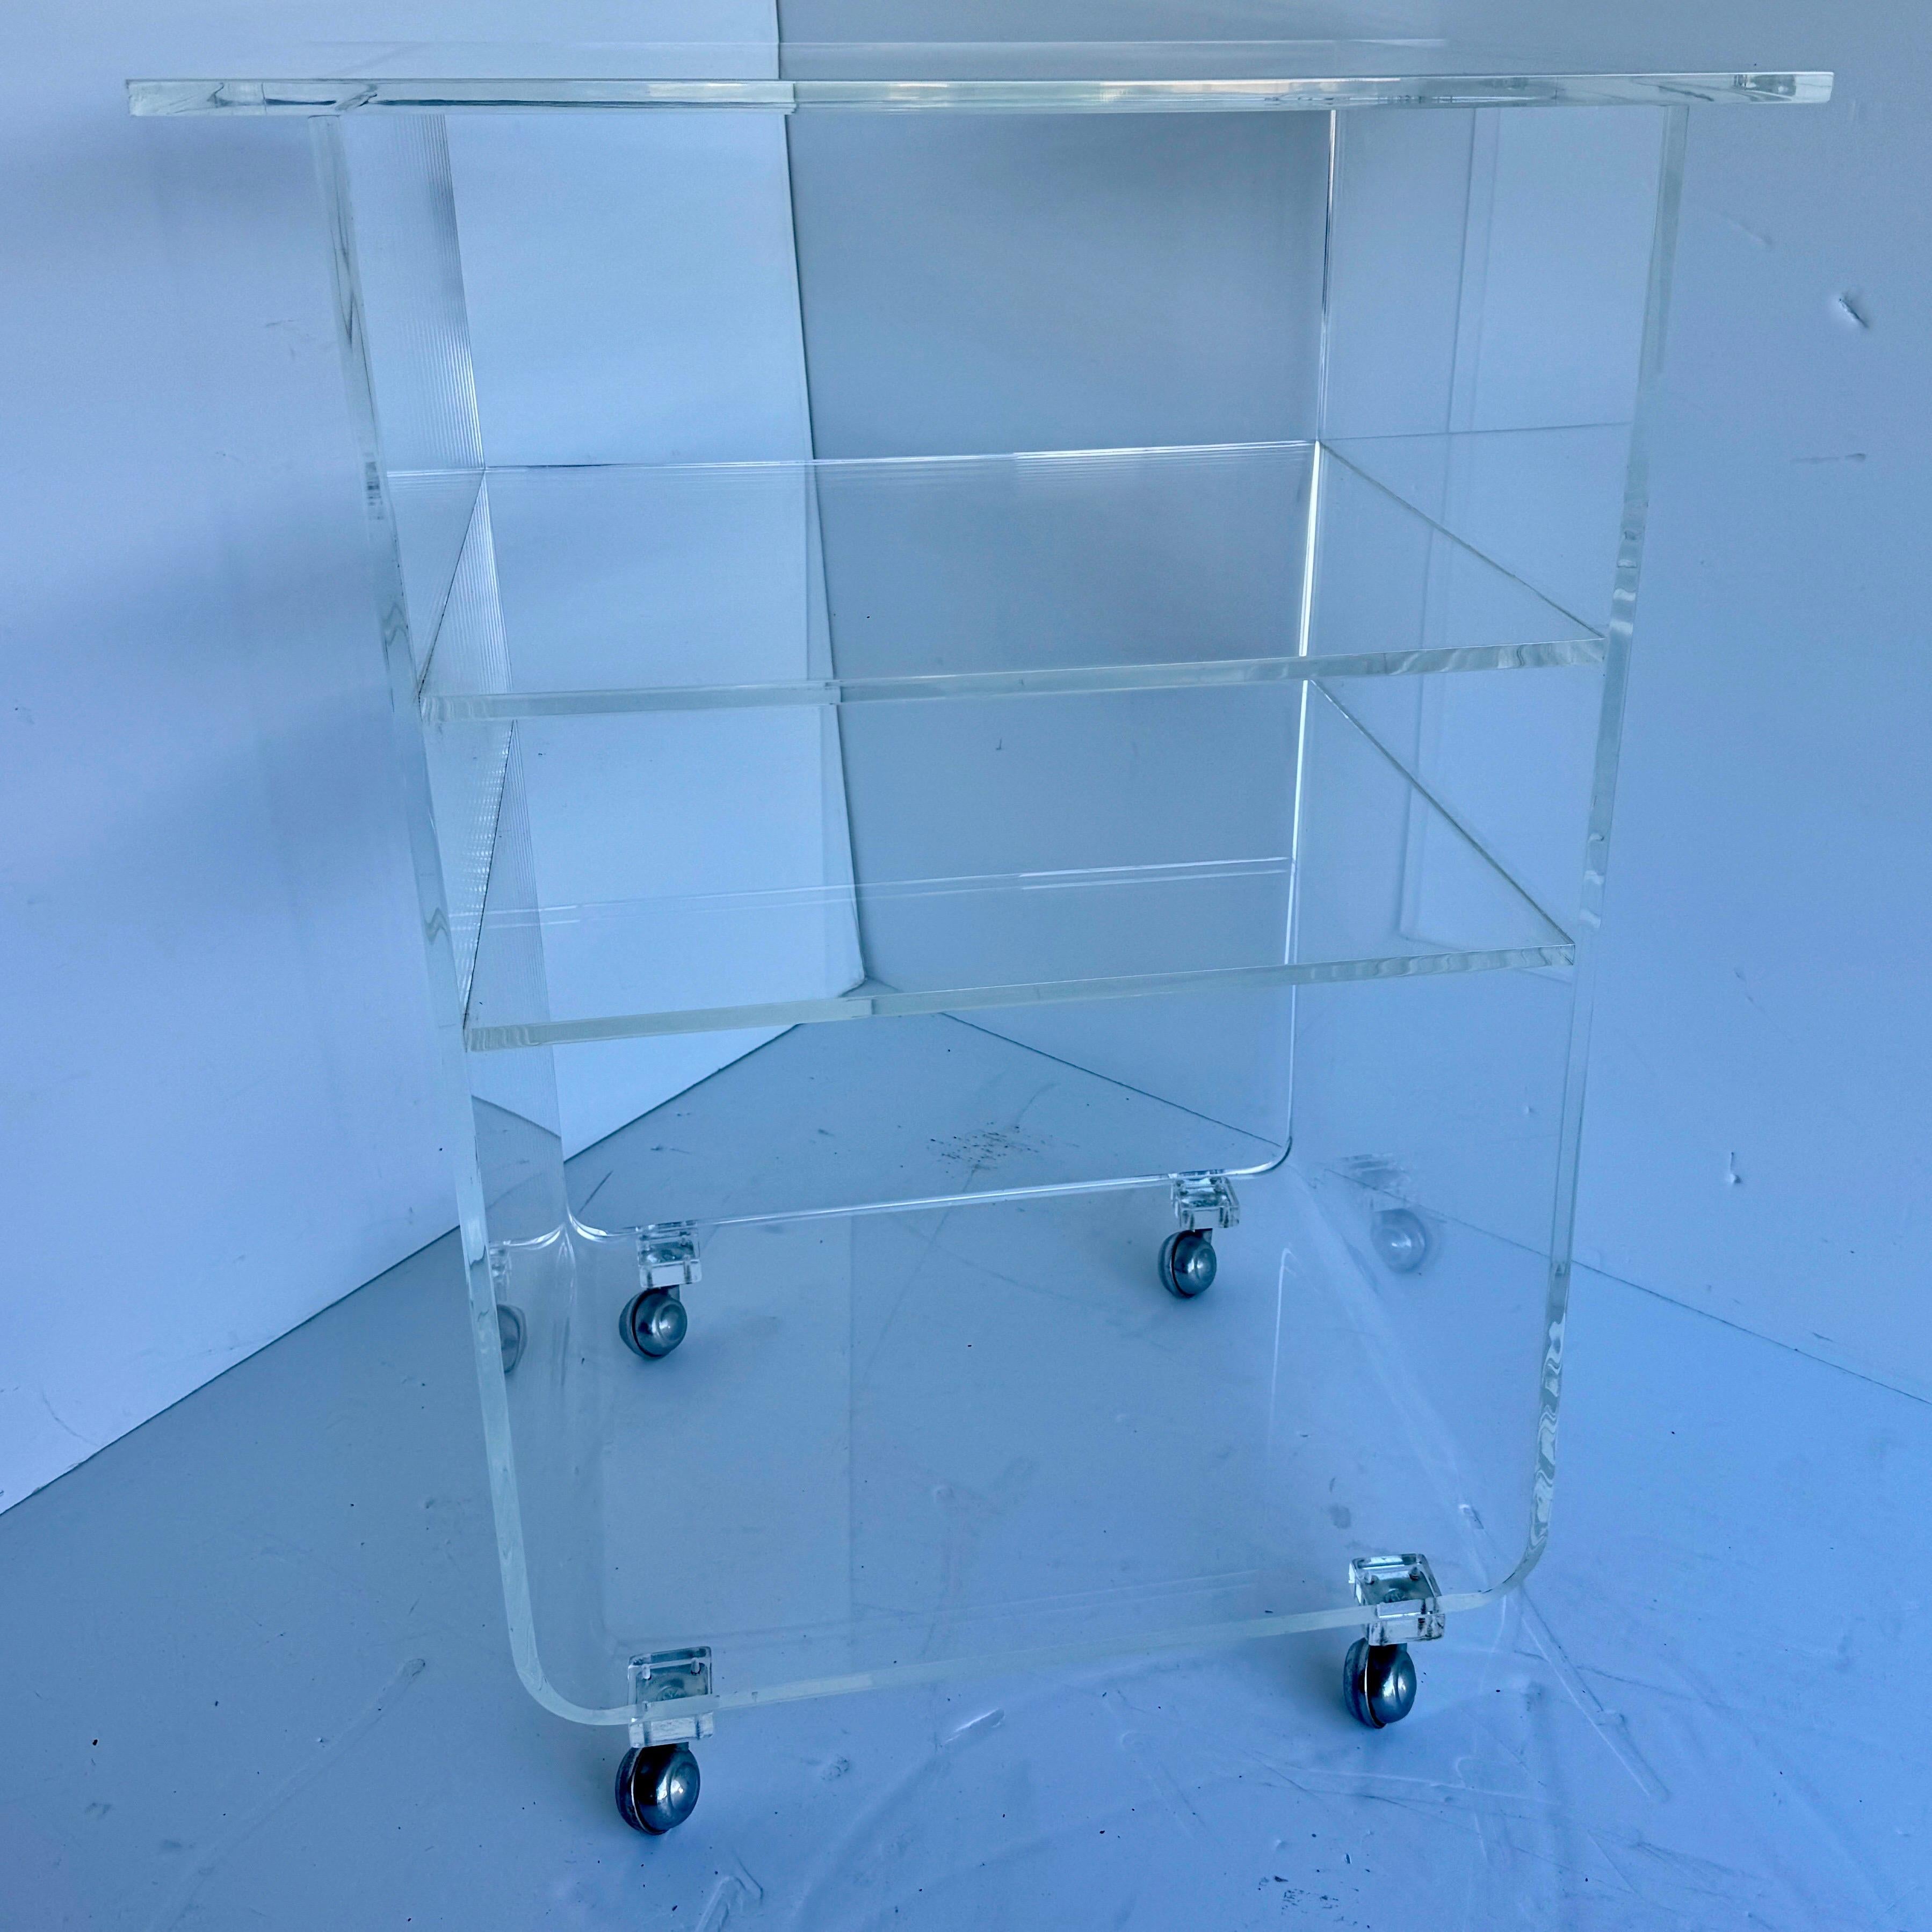 MCM Tiered Lucite Bar Serving Cart, 1970's

Mid-Century Modern multi-purpose lucite serving bar cart or trolley. This cart features 4 classic metal wheels. This minimalist cart certainly gives off a  wonderful Mid-Century vibe.